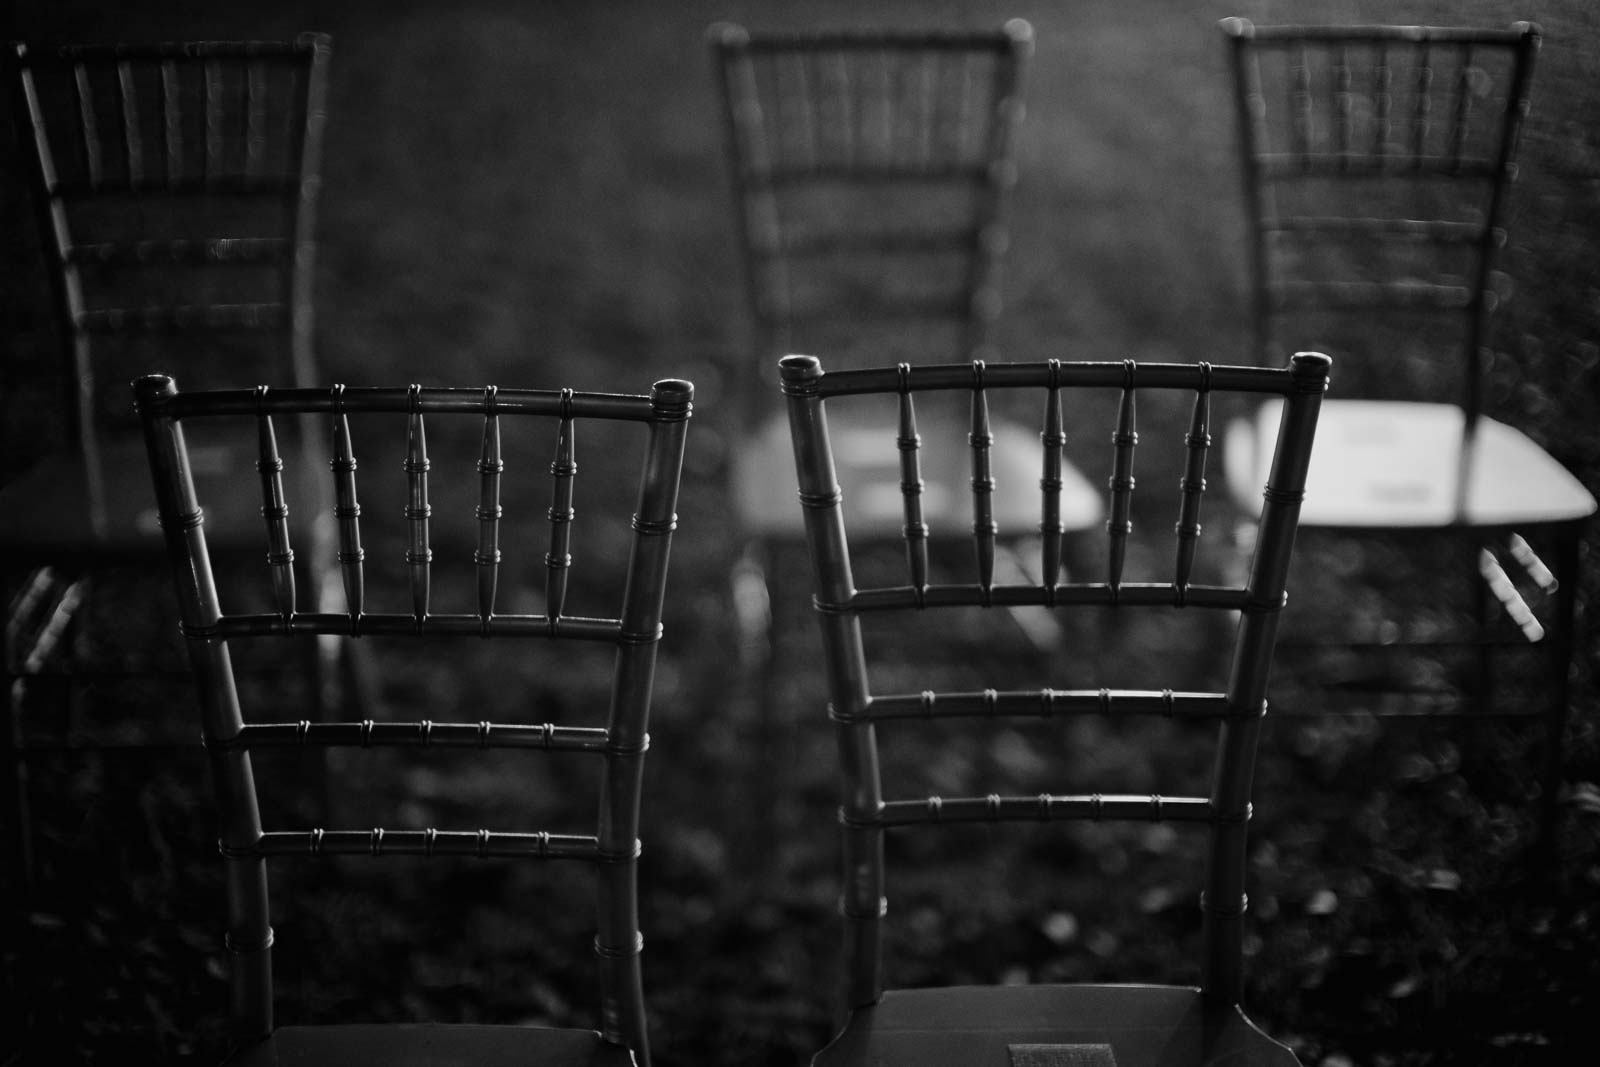 Gorgeous monochrome photograph of the wedding chairs used to turn the ceremony backlit